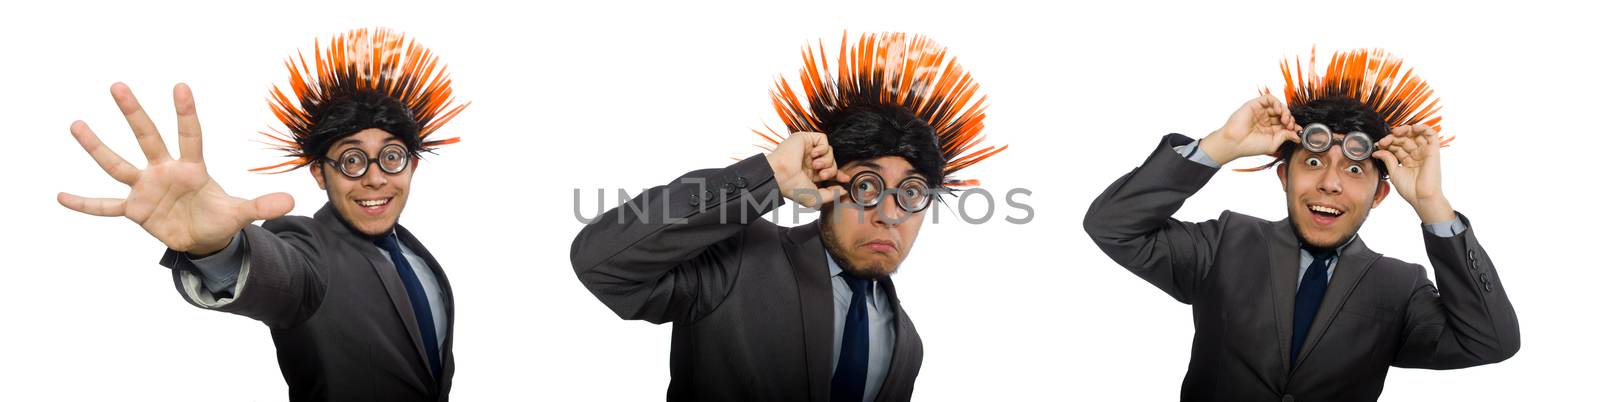 Funny man with mohawk hairstyle